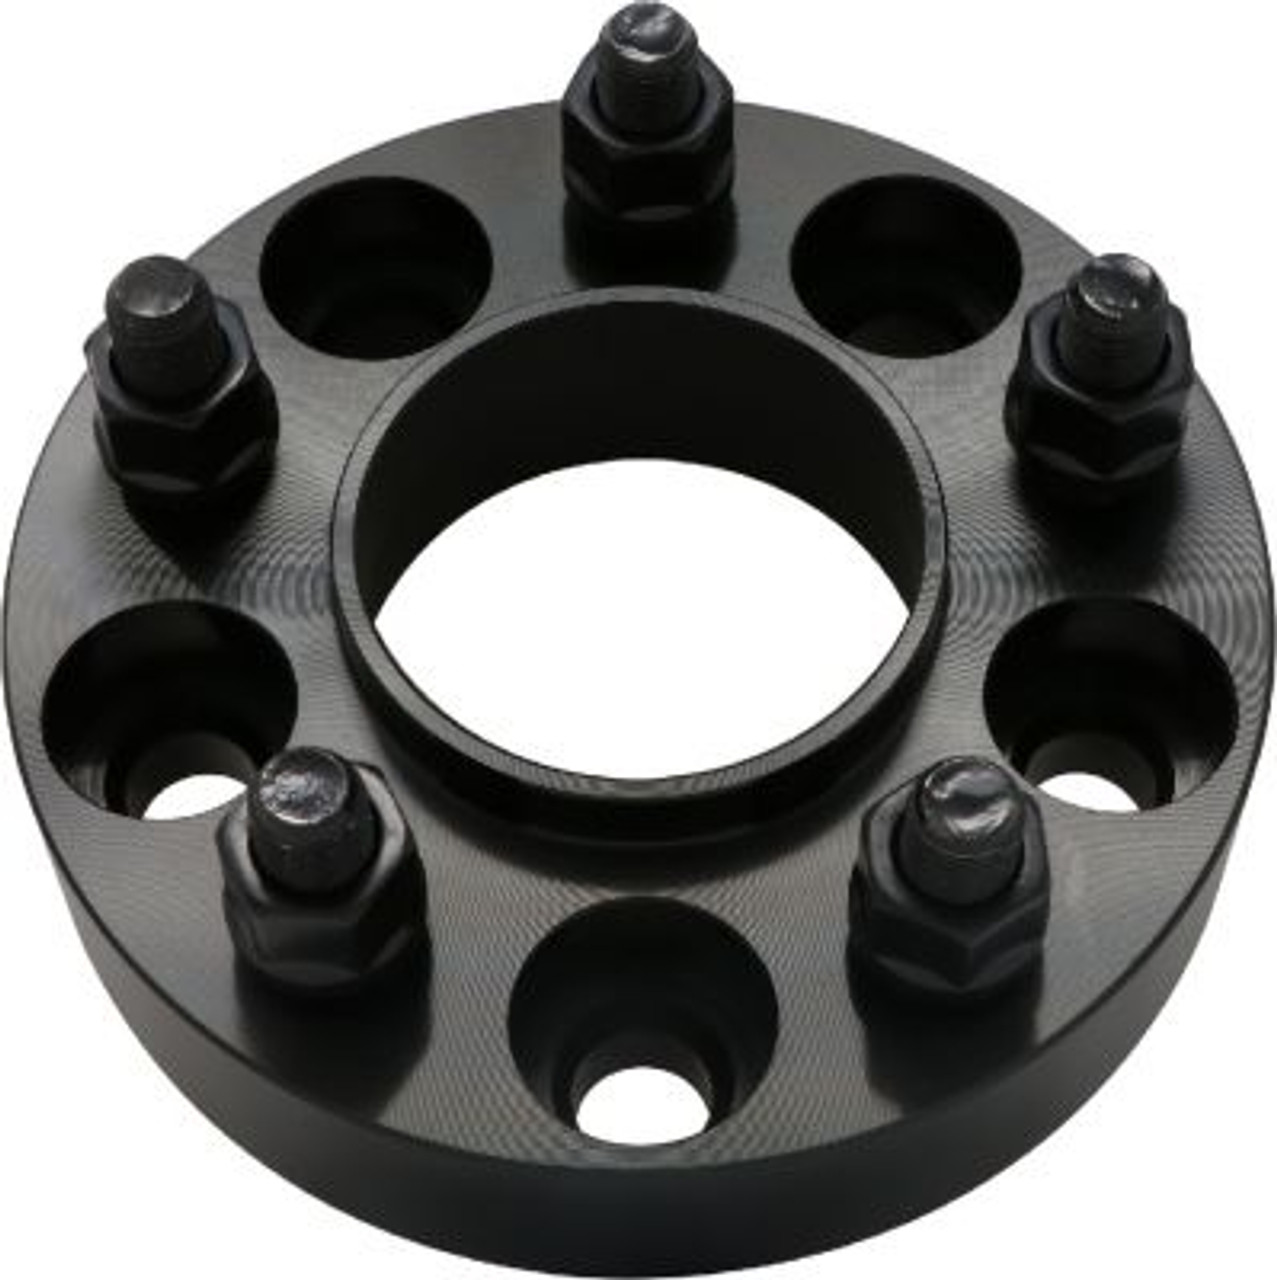 5x5.00 to 5x5.00 Wheel Adapter - 1/2" / 1.25" Thick / 71.5mm CB / 71.5mm WB